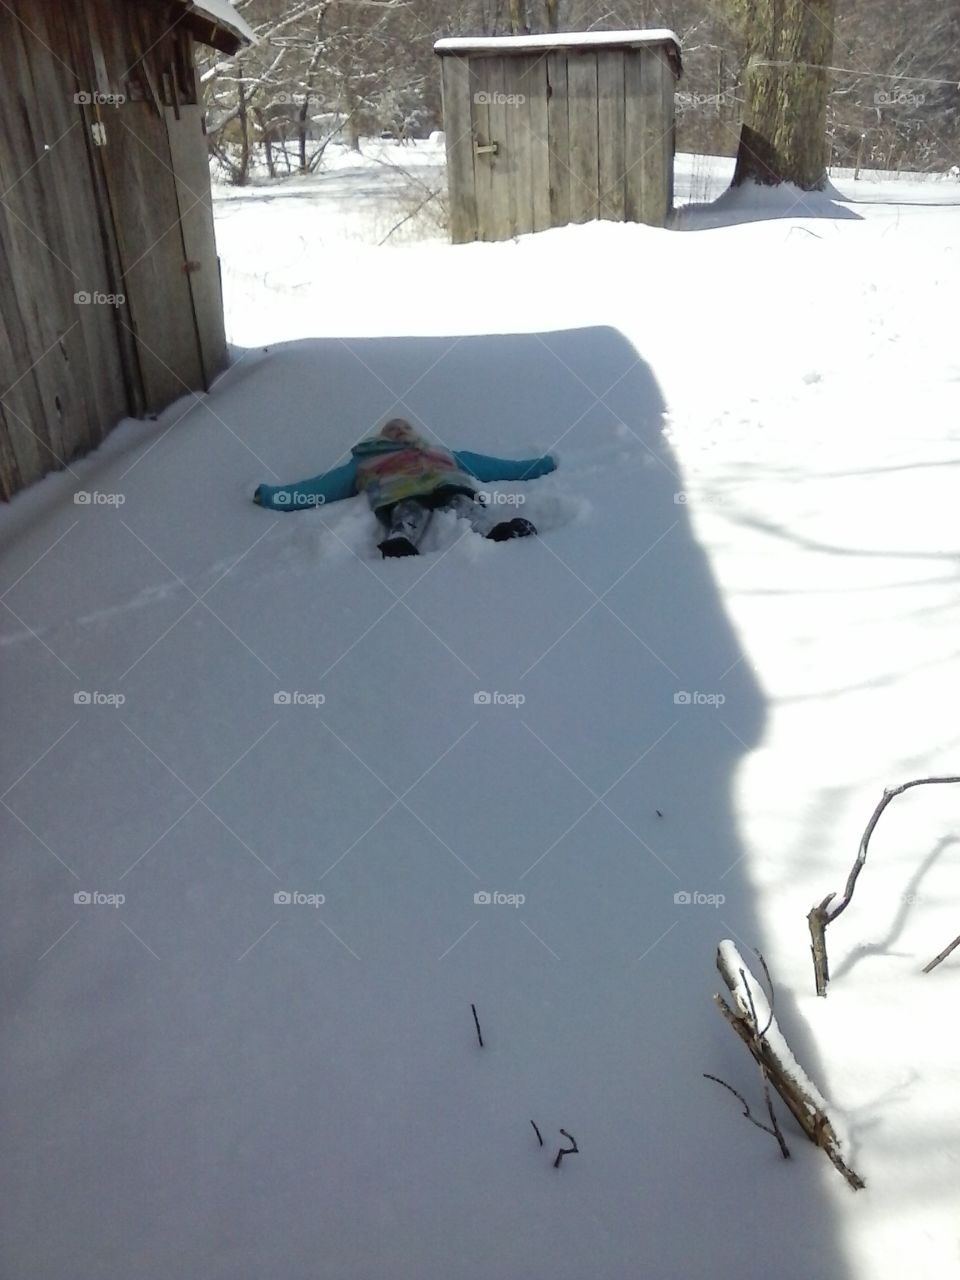 snow angel. small child making a shoe angel